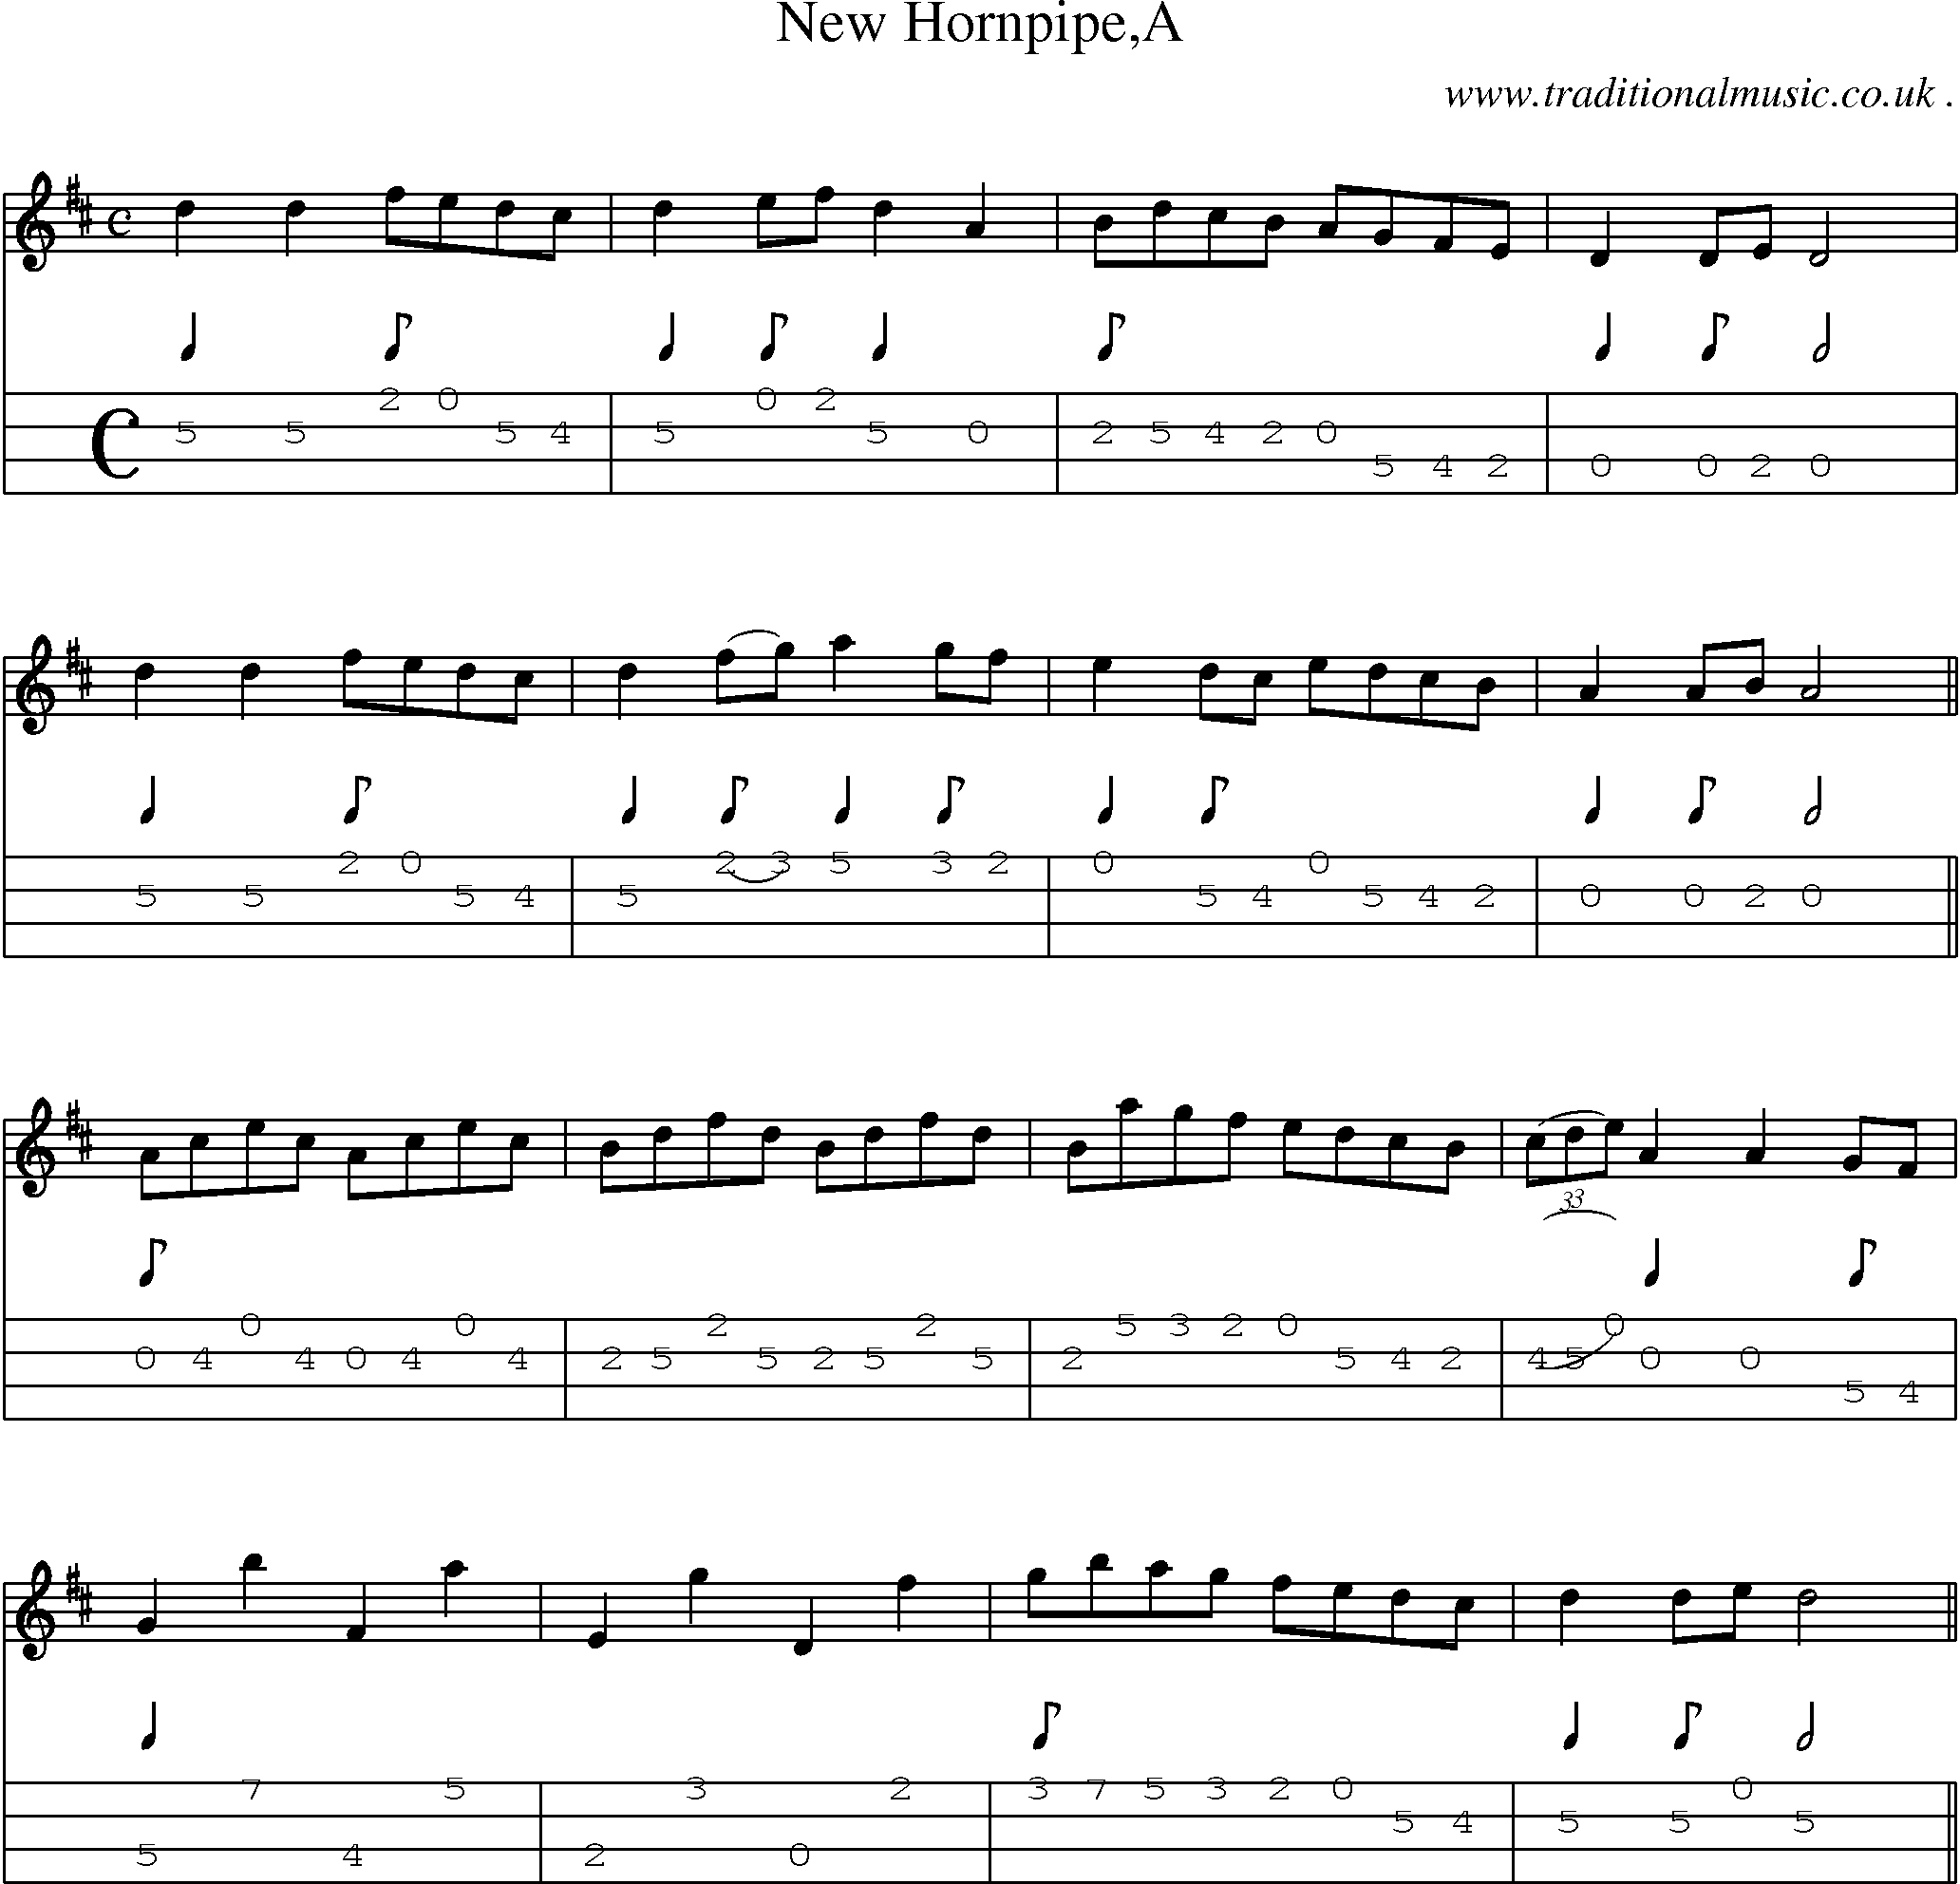 Sheet-Music and Mandolin Tabs for New Hornpipea